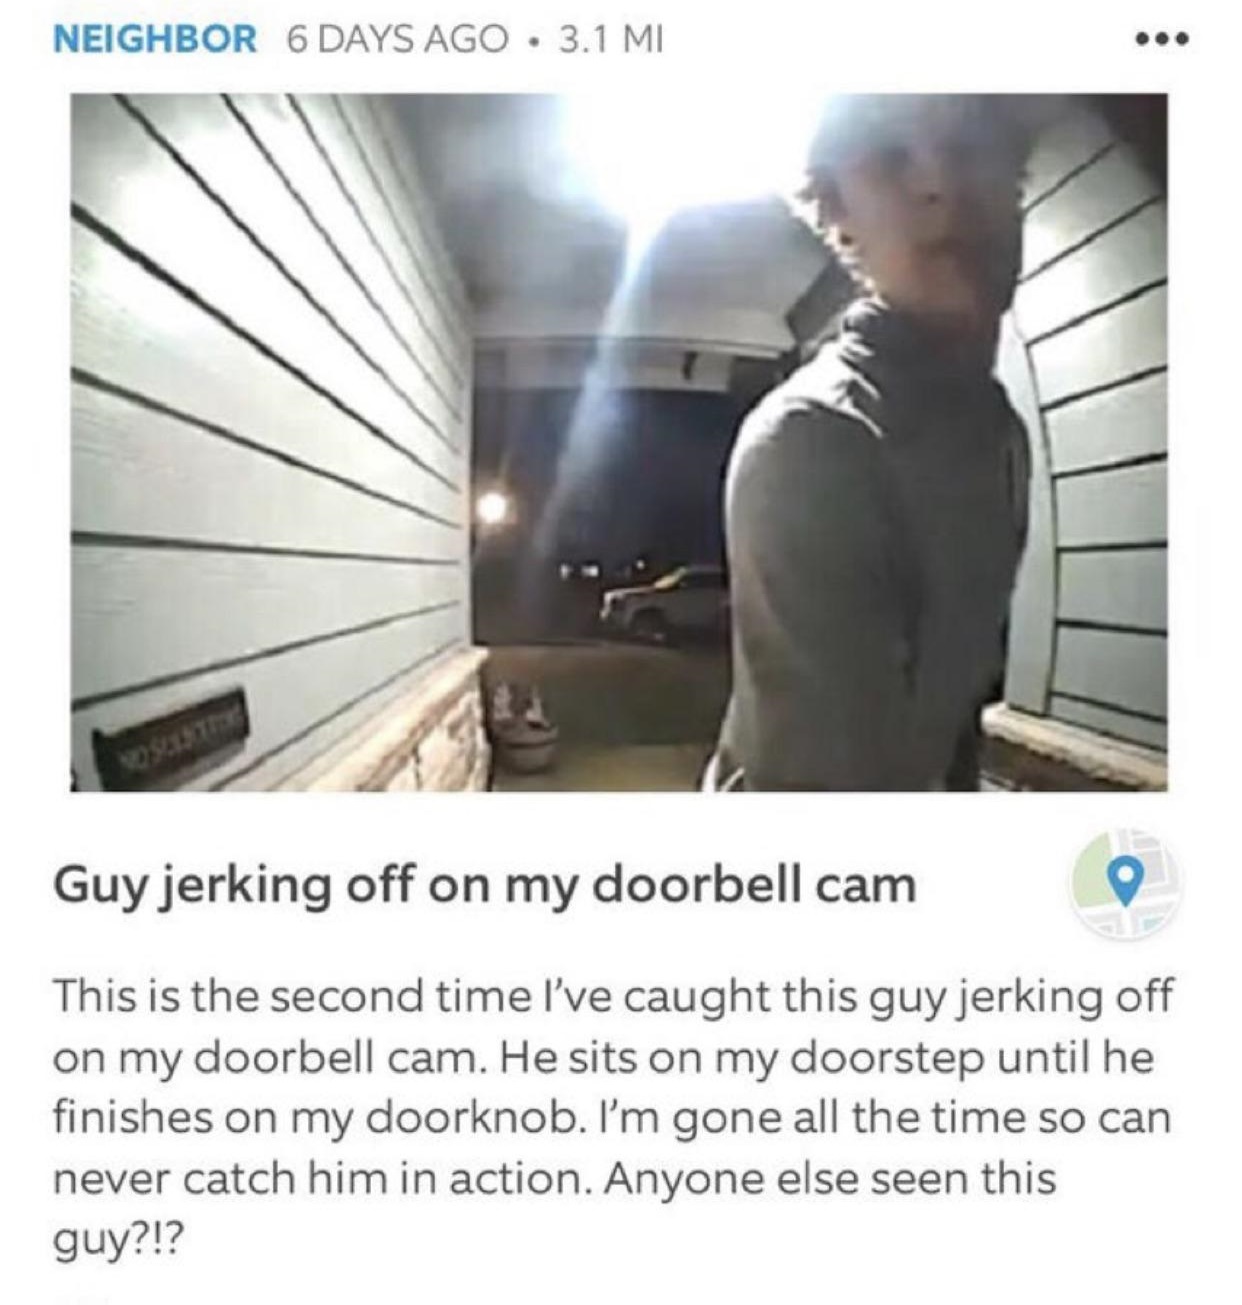 photo caption - Neighbor 6 Days Ago 3.1 Mi Guy jerking off on my doorbell cam This is the second time I've caught this guy jerking off on my doorbell cam. He sits on my doorstep until he finishes on my doorknob. I'm gone all the time so can never catch hi